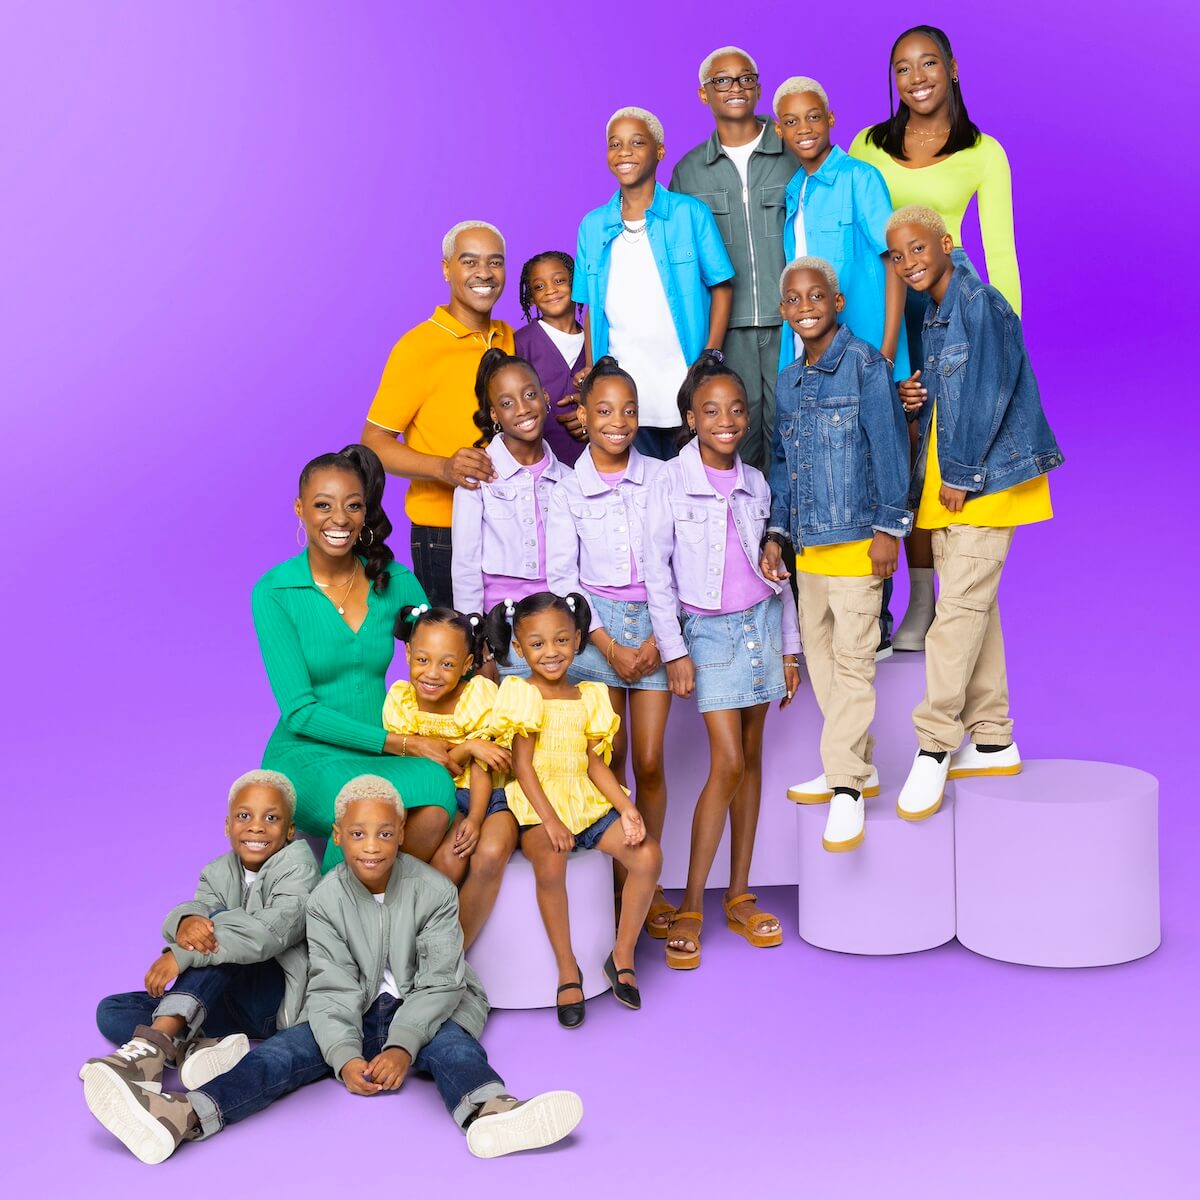 The 17 members of the Derrico family from 'Doubling Down With the Derricos' on a purple background